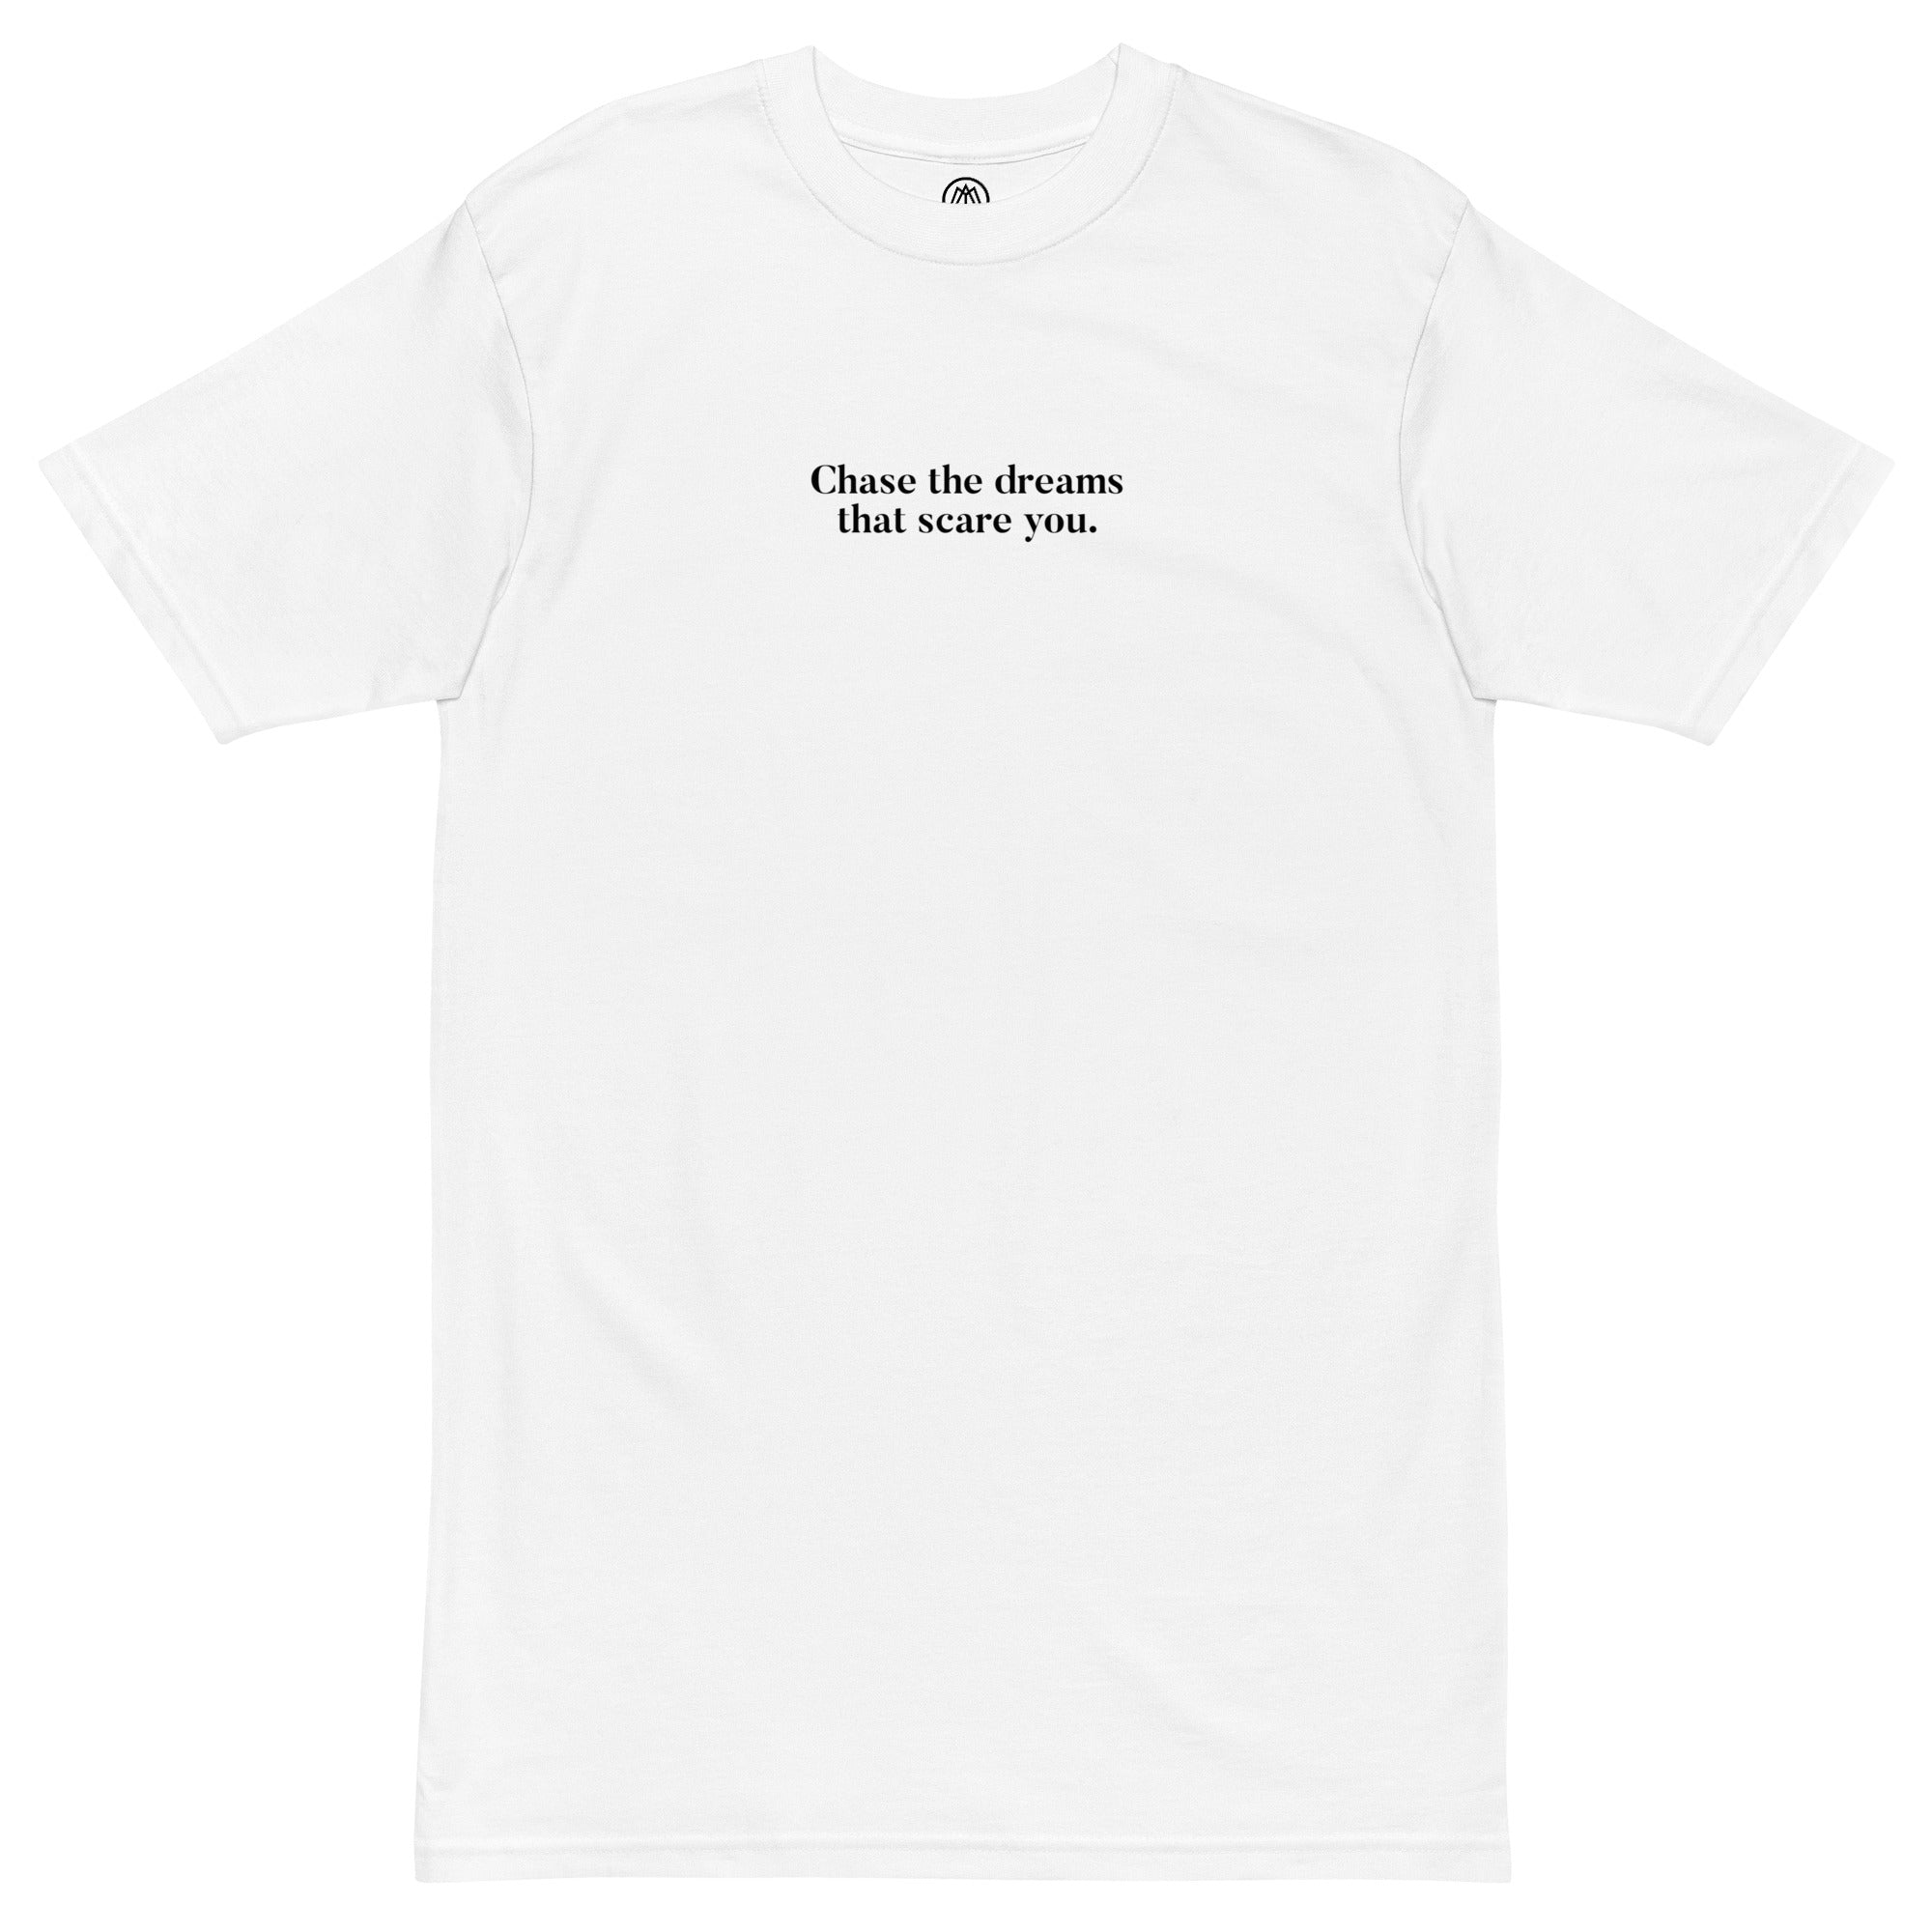 Chase the Dreams Tee - White